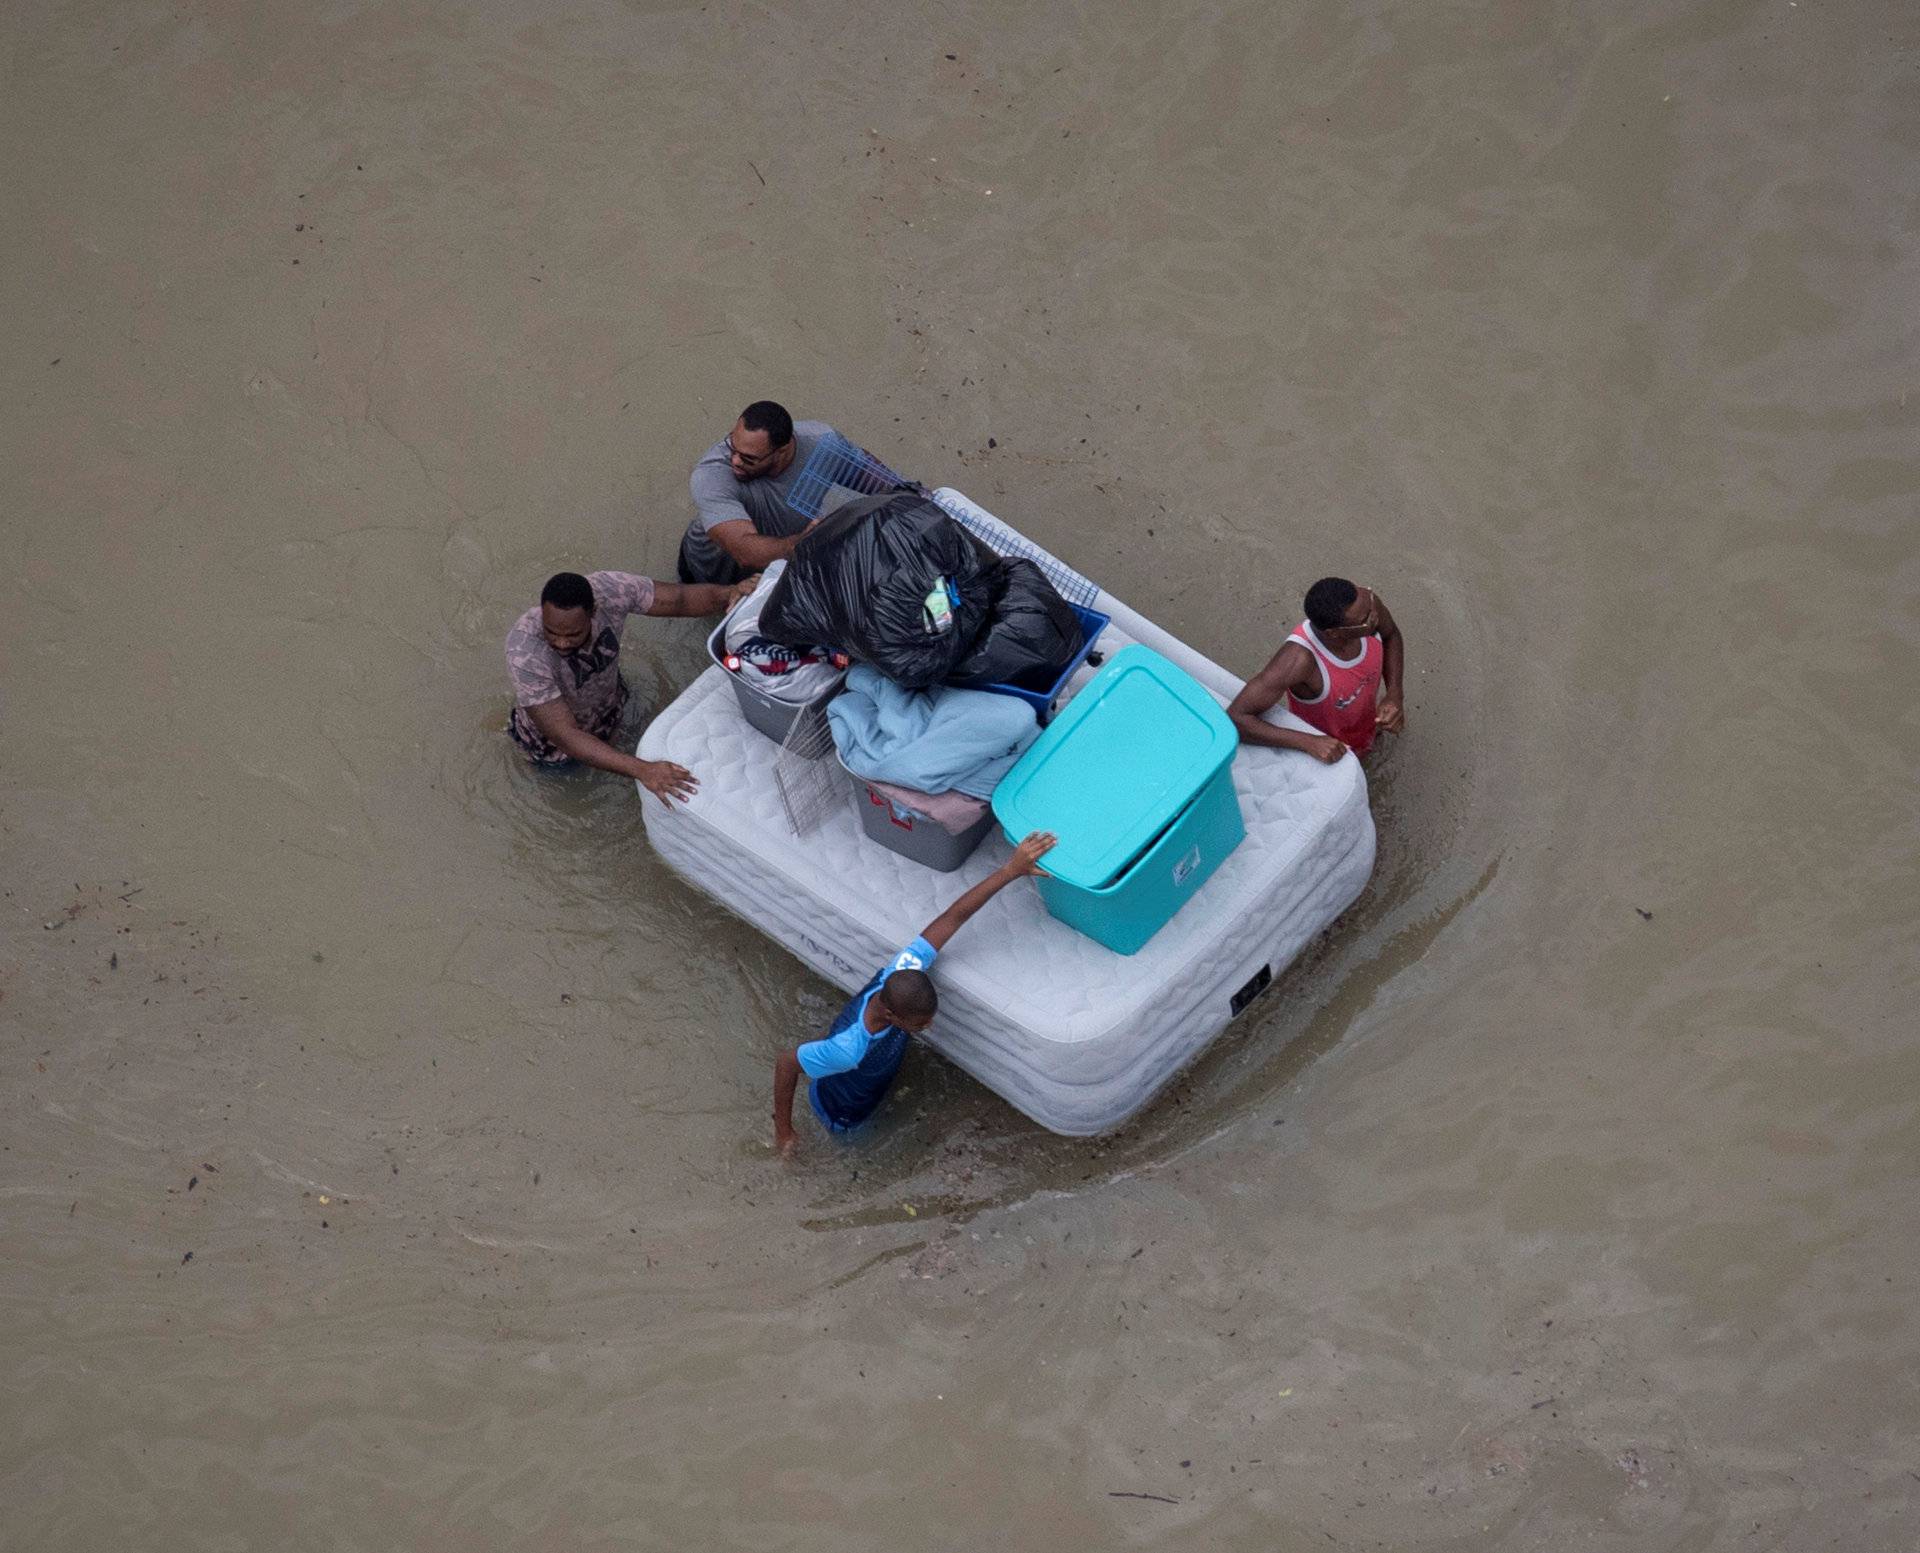 Residents wade with belongings through floods caused by Tropical Storm Harvey while awaiting rescue in Houston